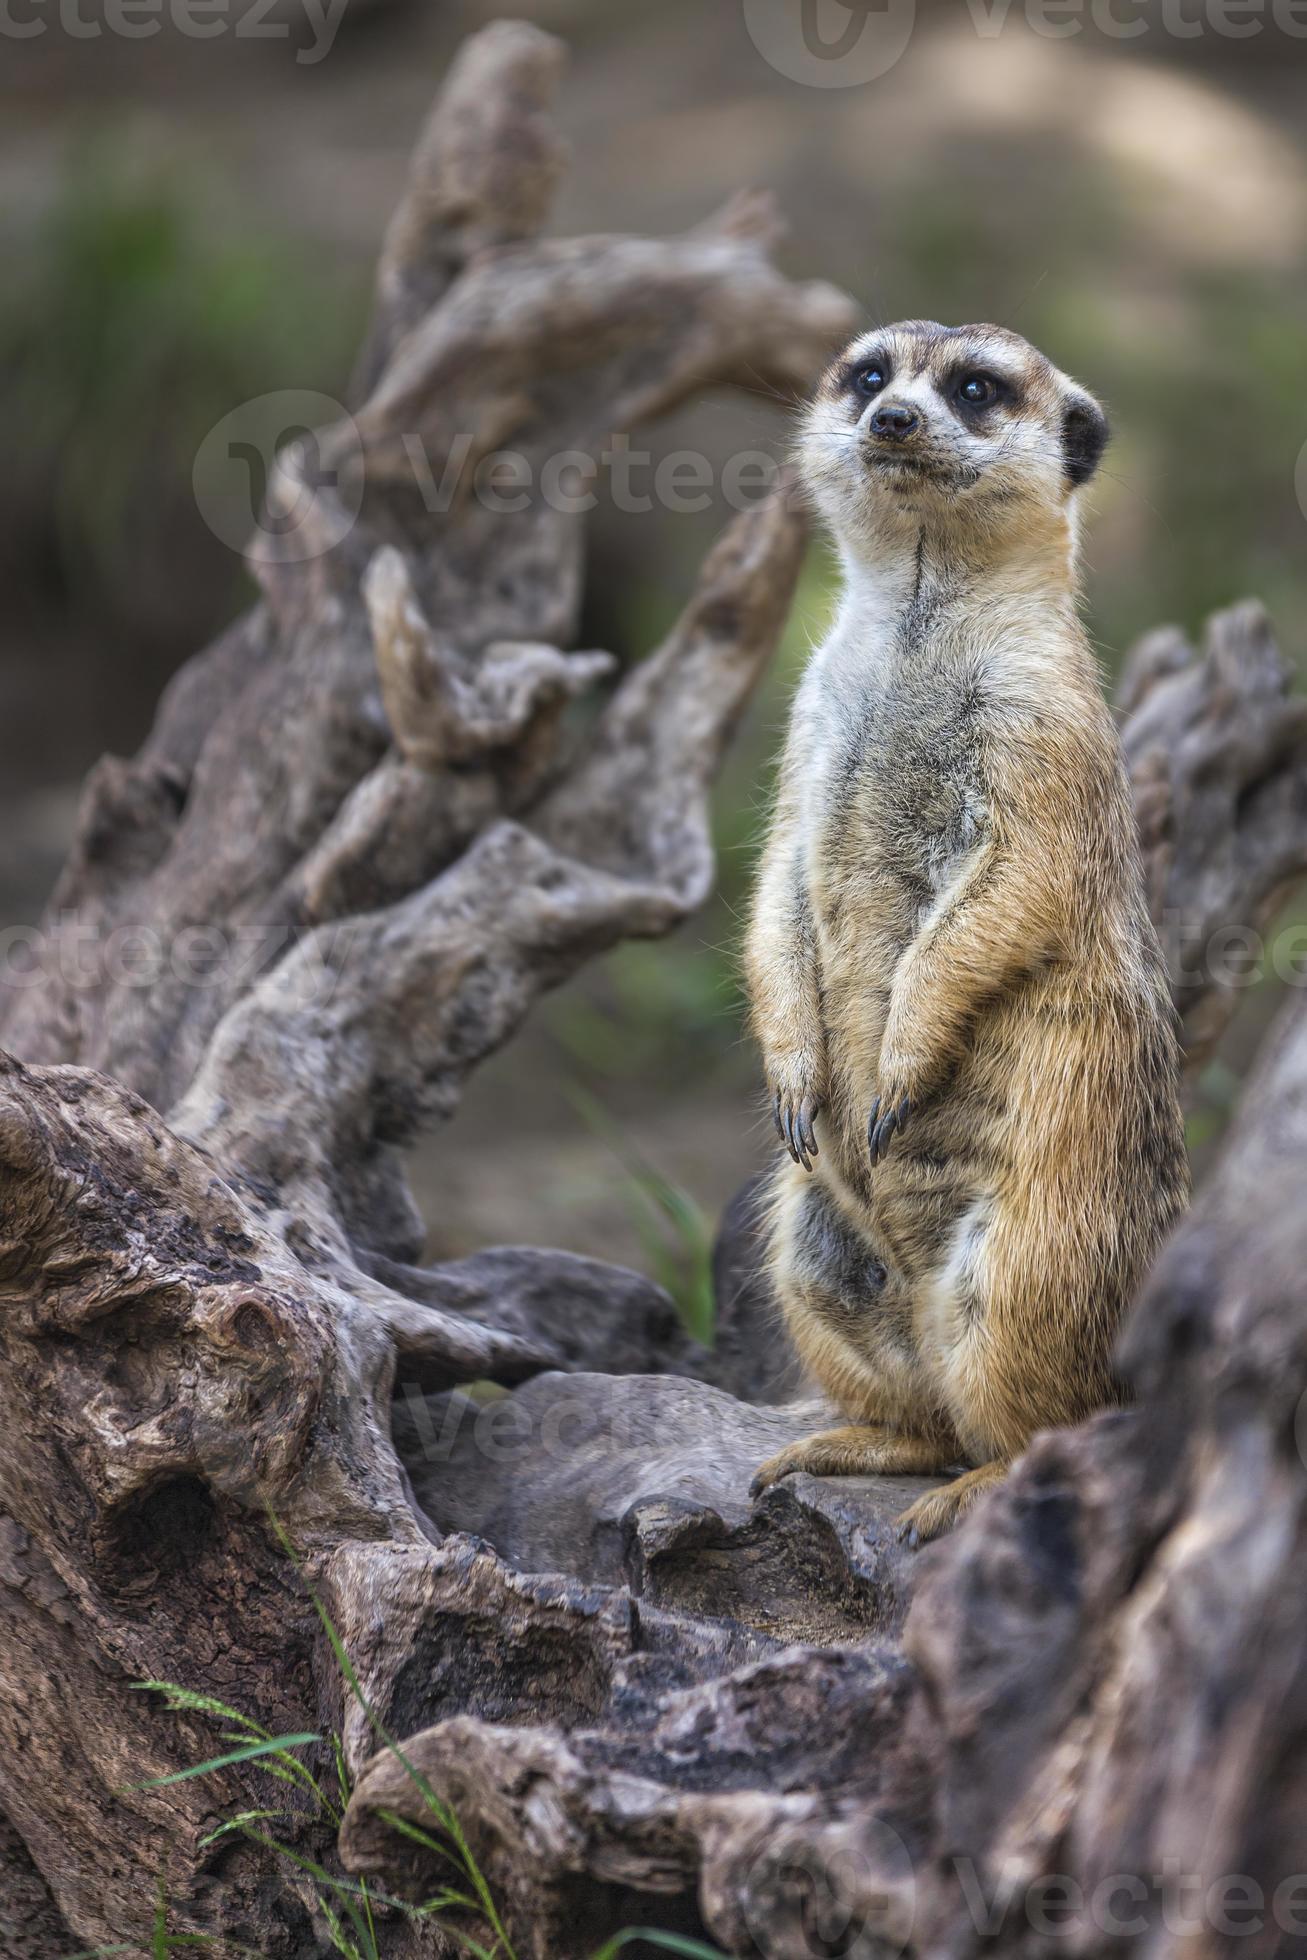 Portrait of Single meerkat or Suricate standing with blurred background,  African native animal, small carnivoran belonging to the mongoose family  8095810 Stock Photo at Vecteezy